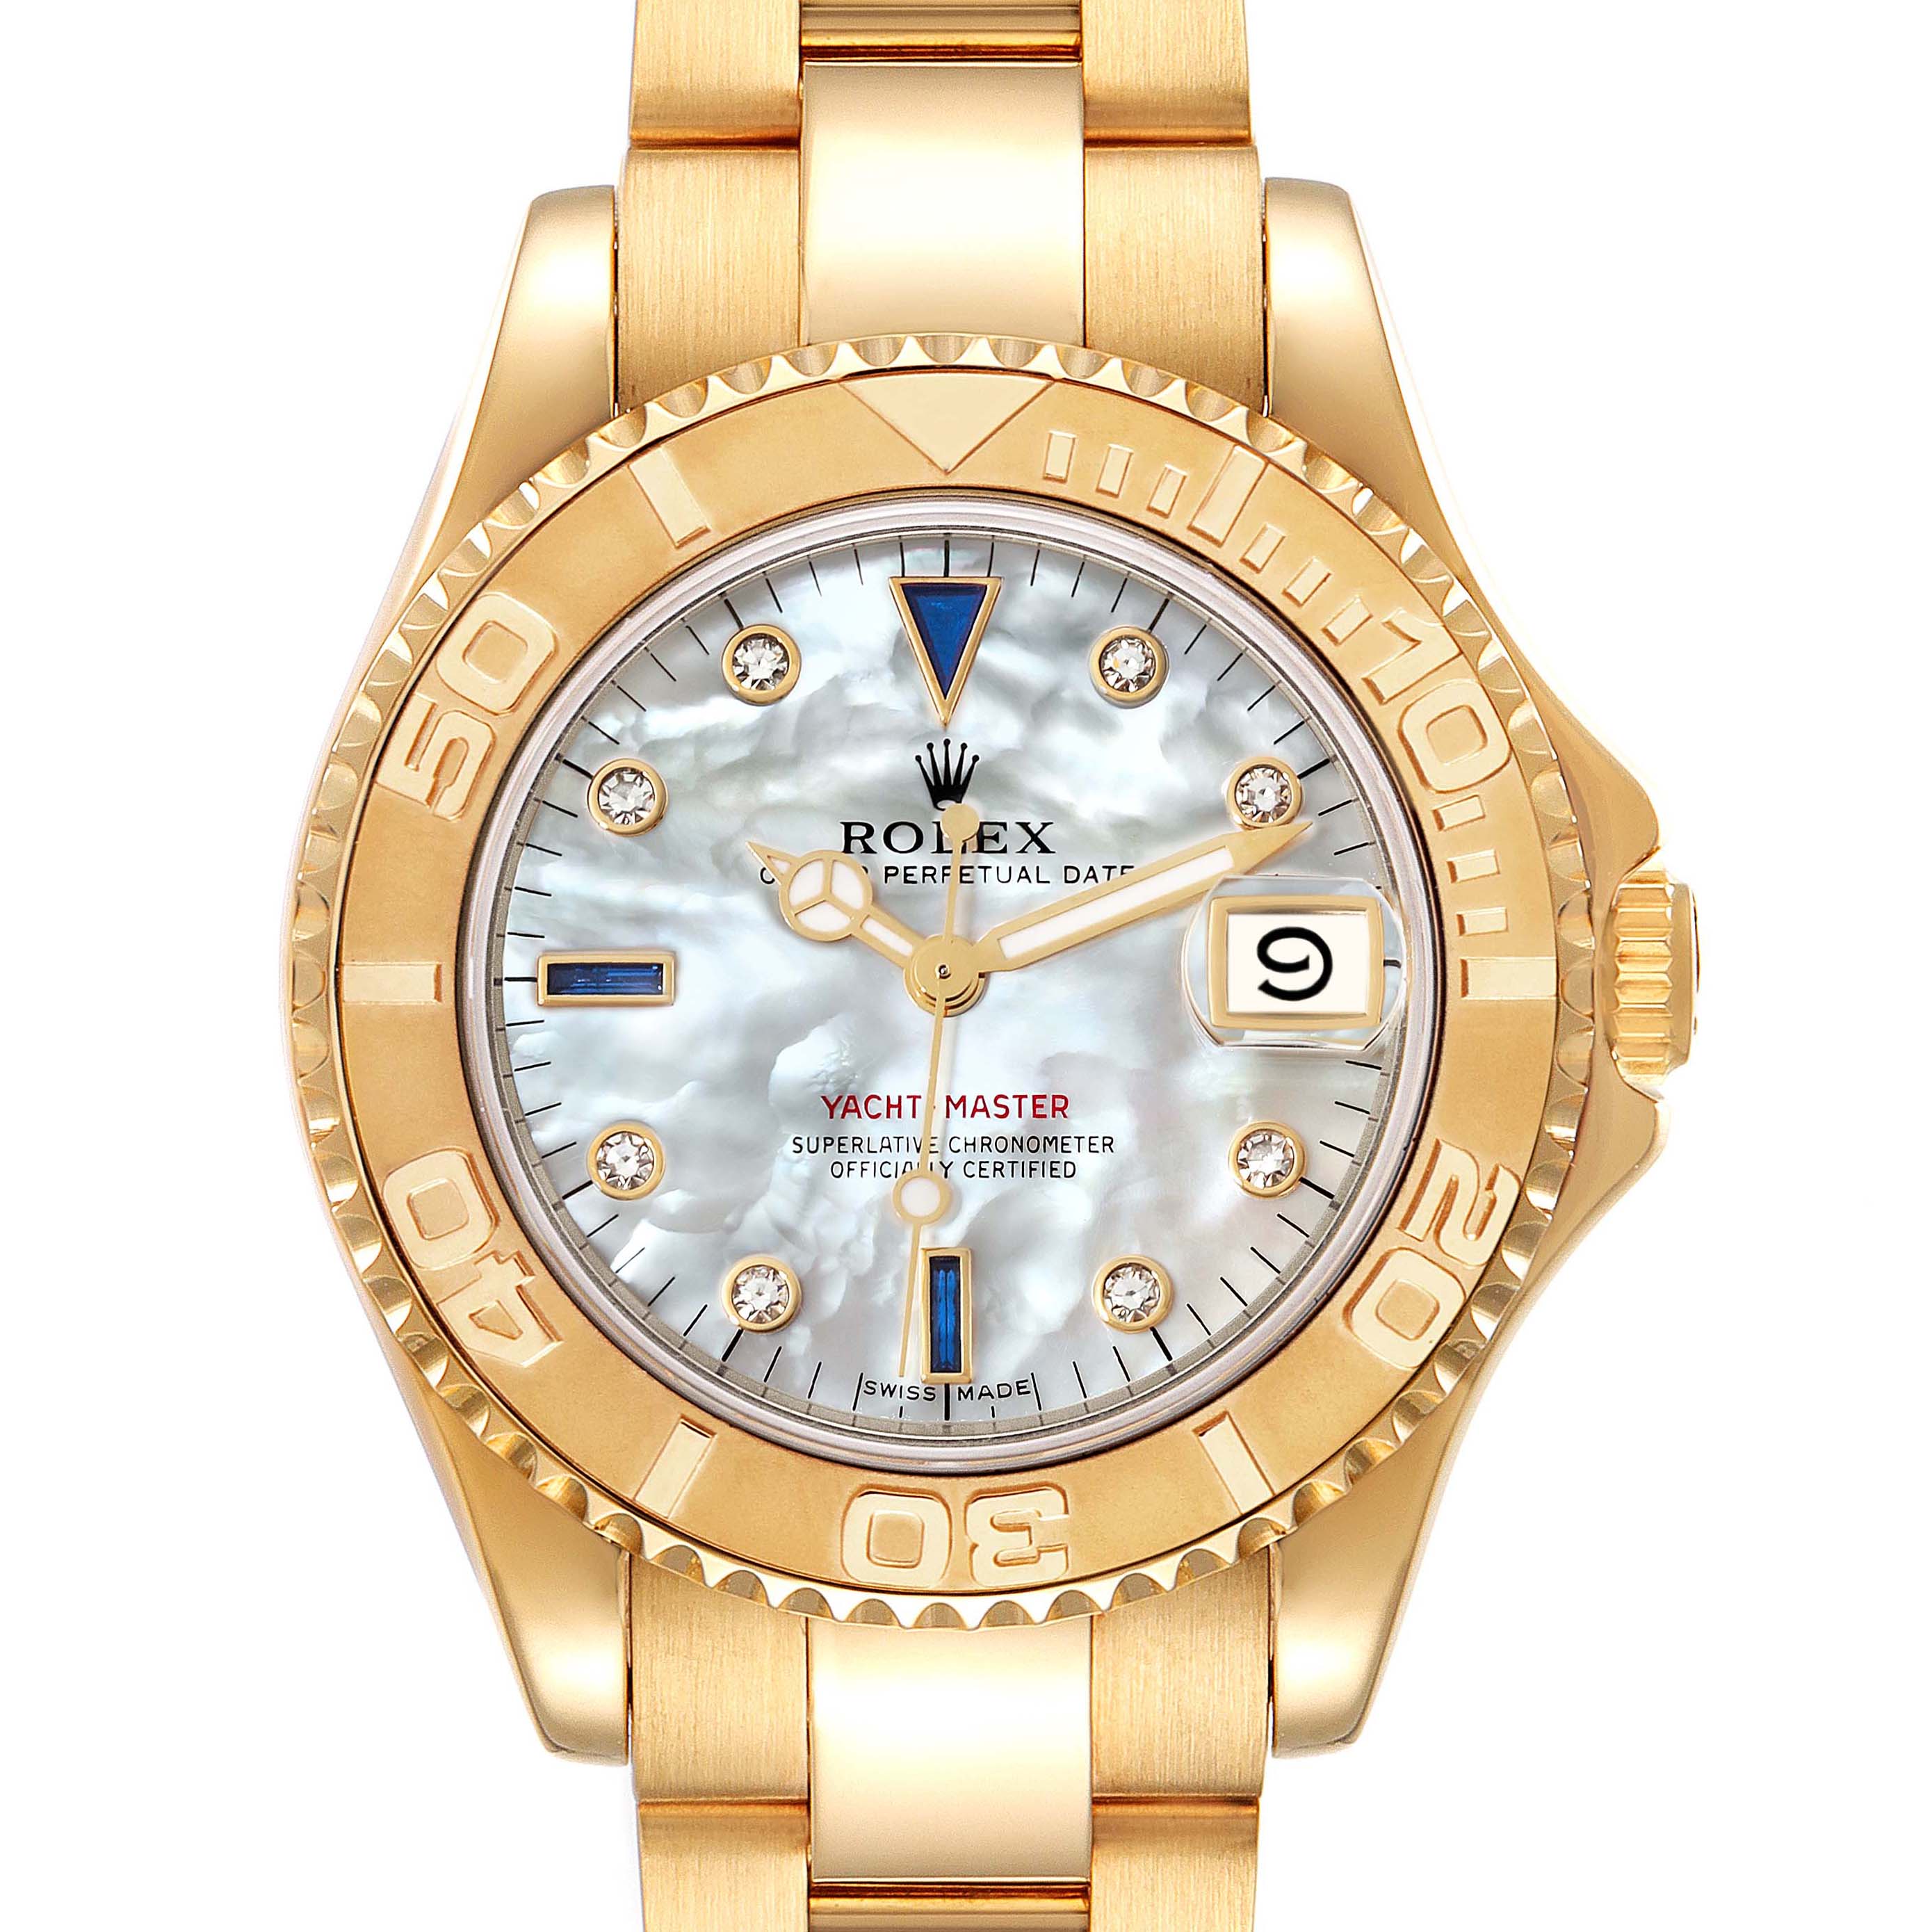 Welcome to : Rare Yellow Gold Yacht-Master with